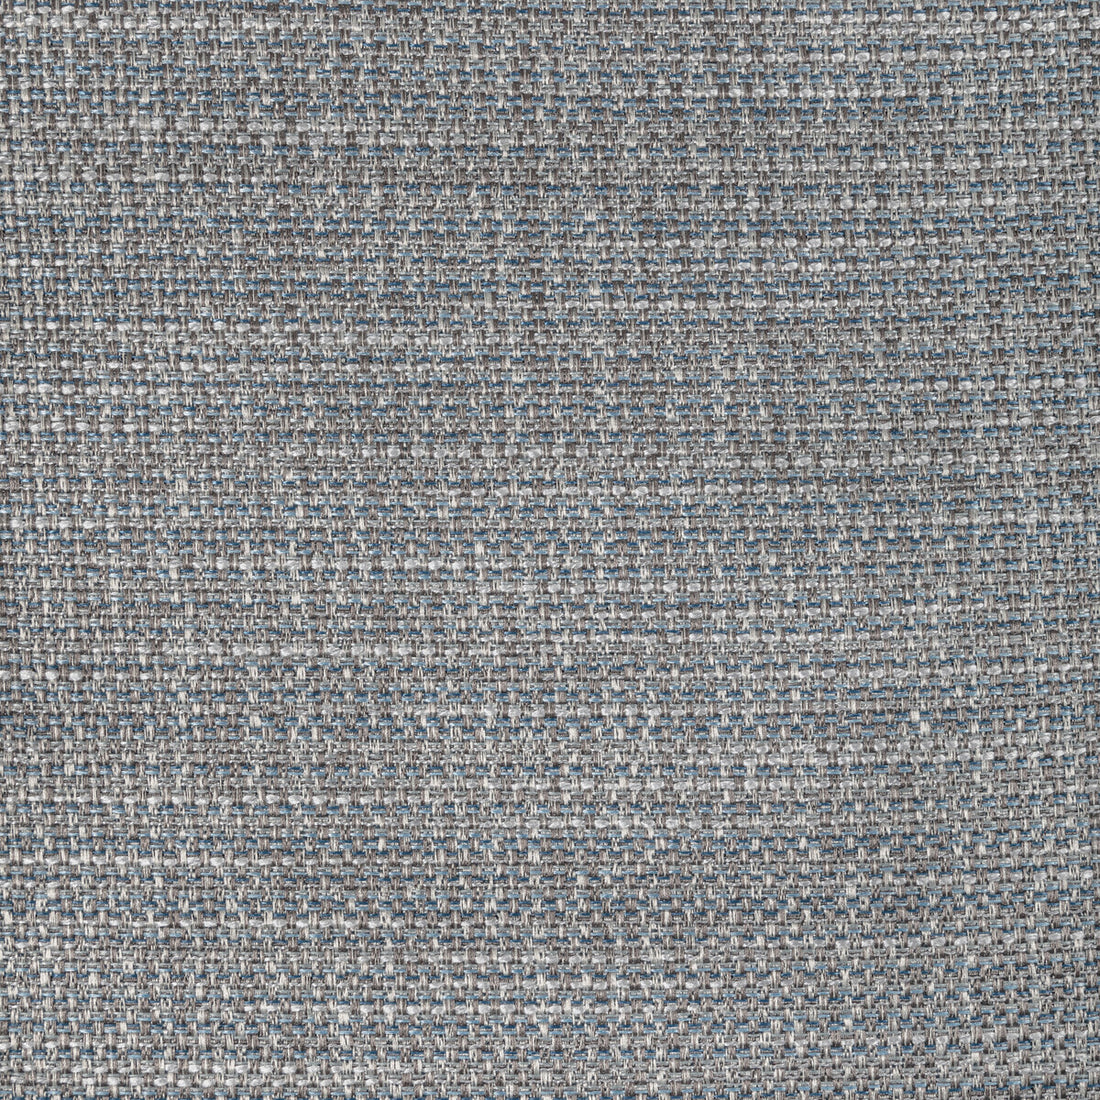 Luma Texture fabric in arctic color - pattern 4947.511.0 - by Kravet Contract in the Fr Window Luma Texture collection